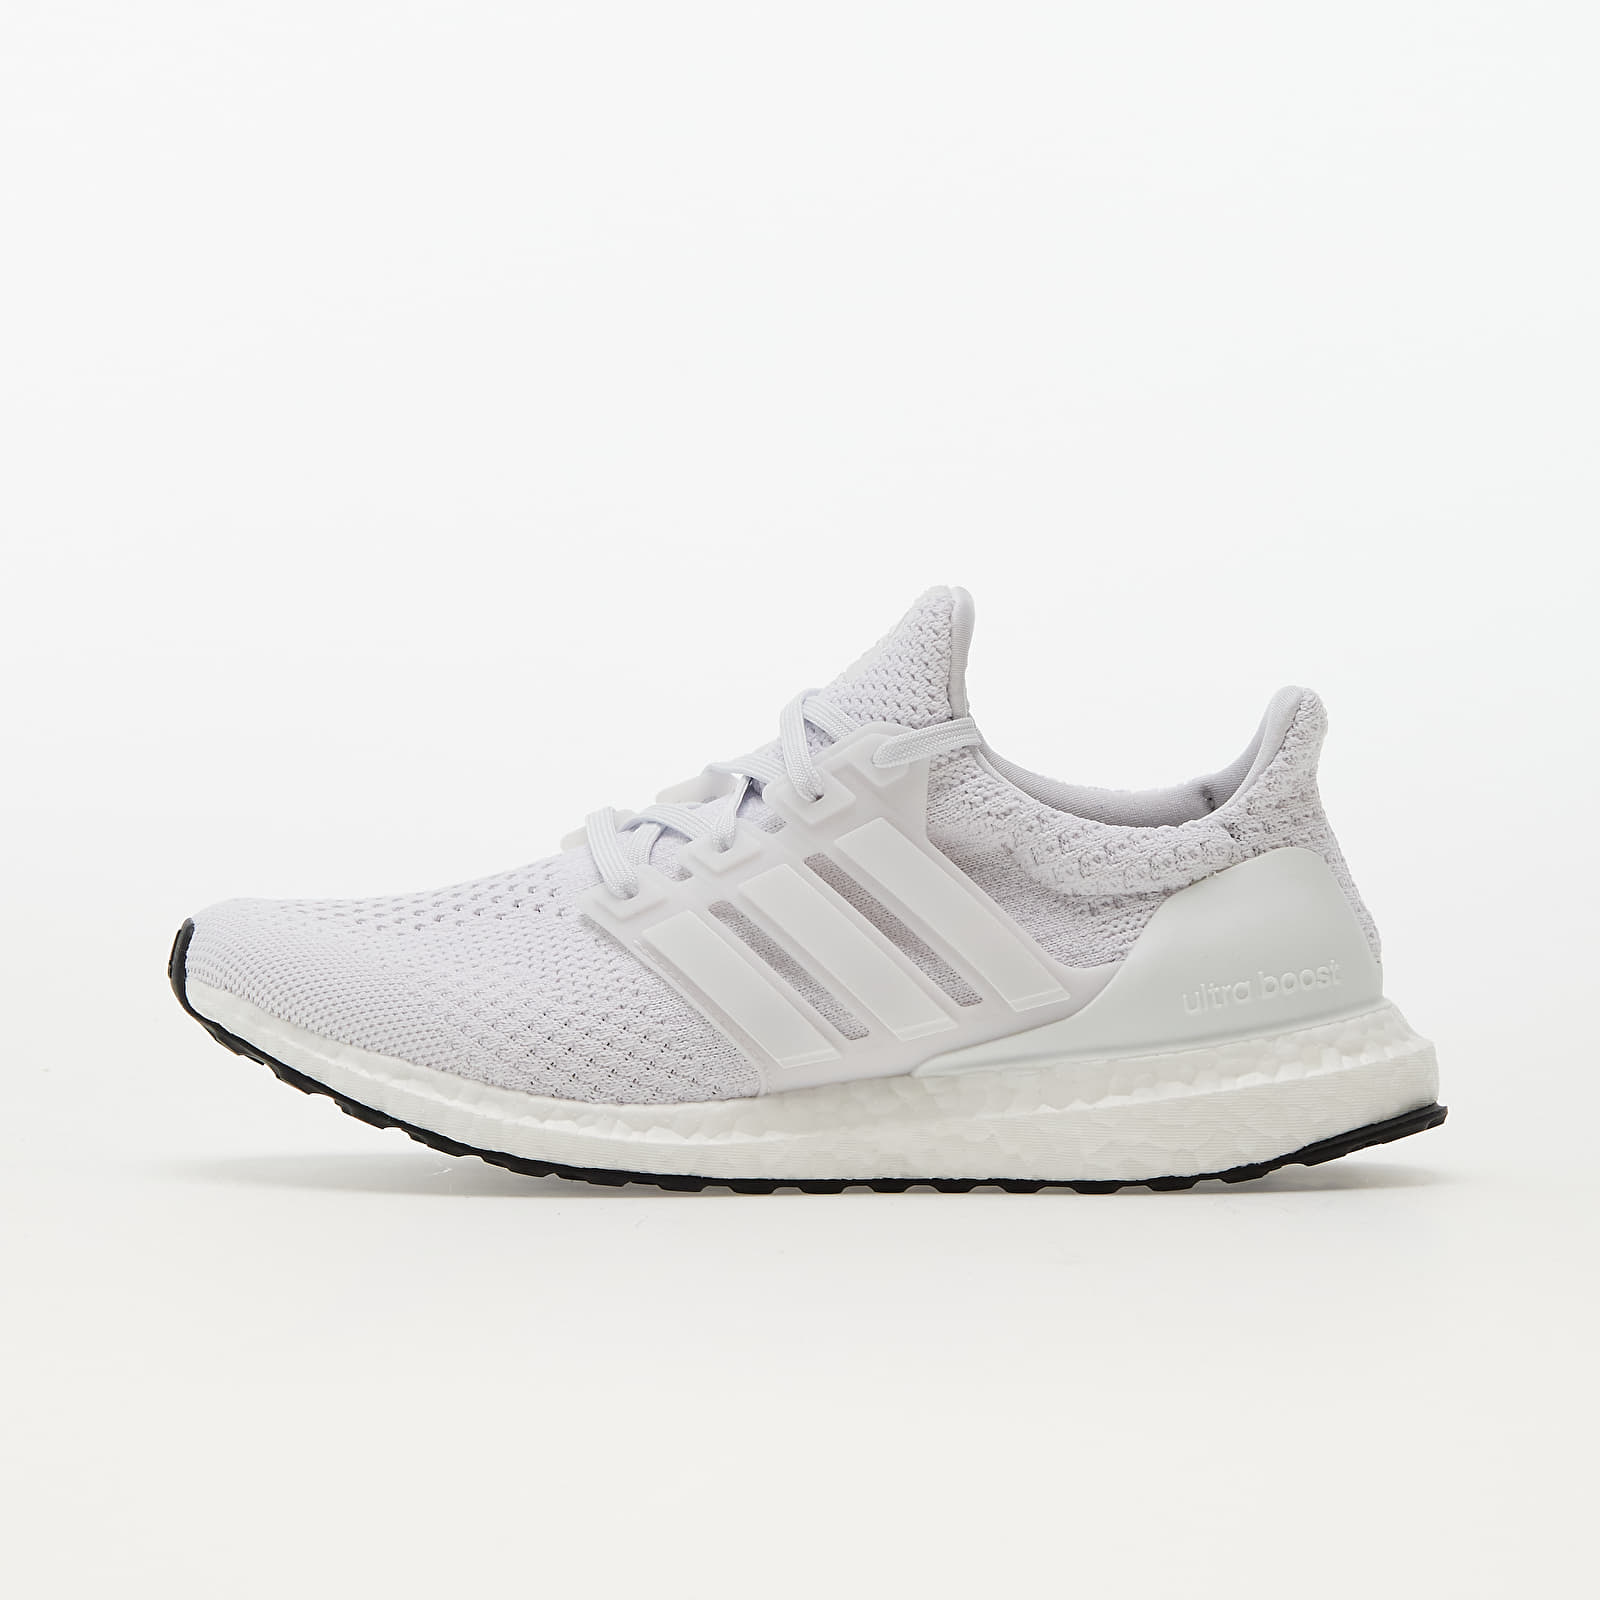 Women's shoes adidas UltraBOOST 5.0 Dna Ftw White/ Ftw White/ Ftw White